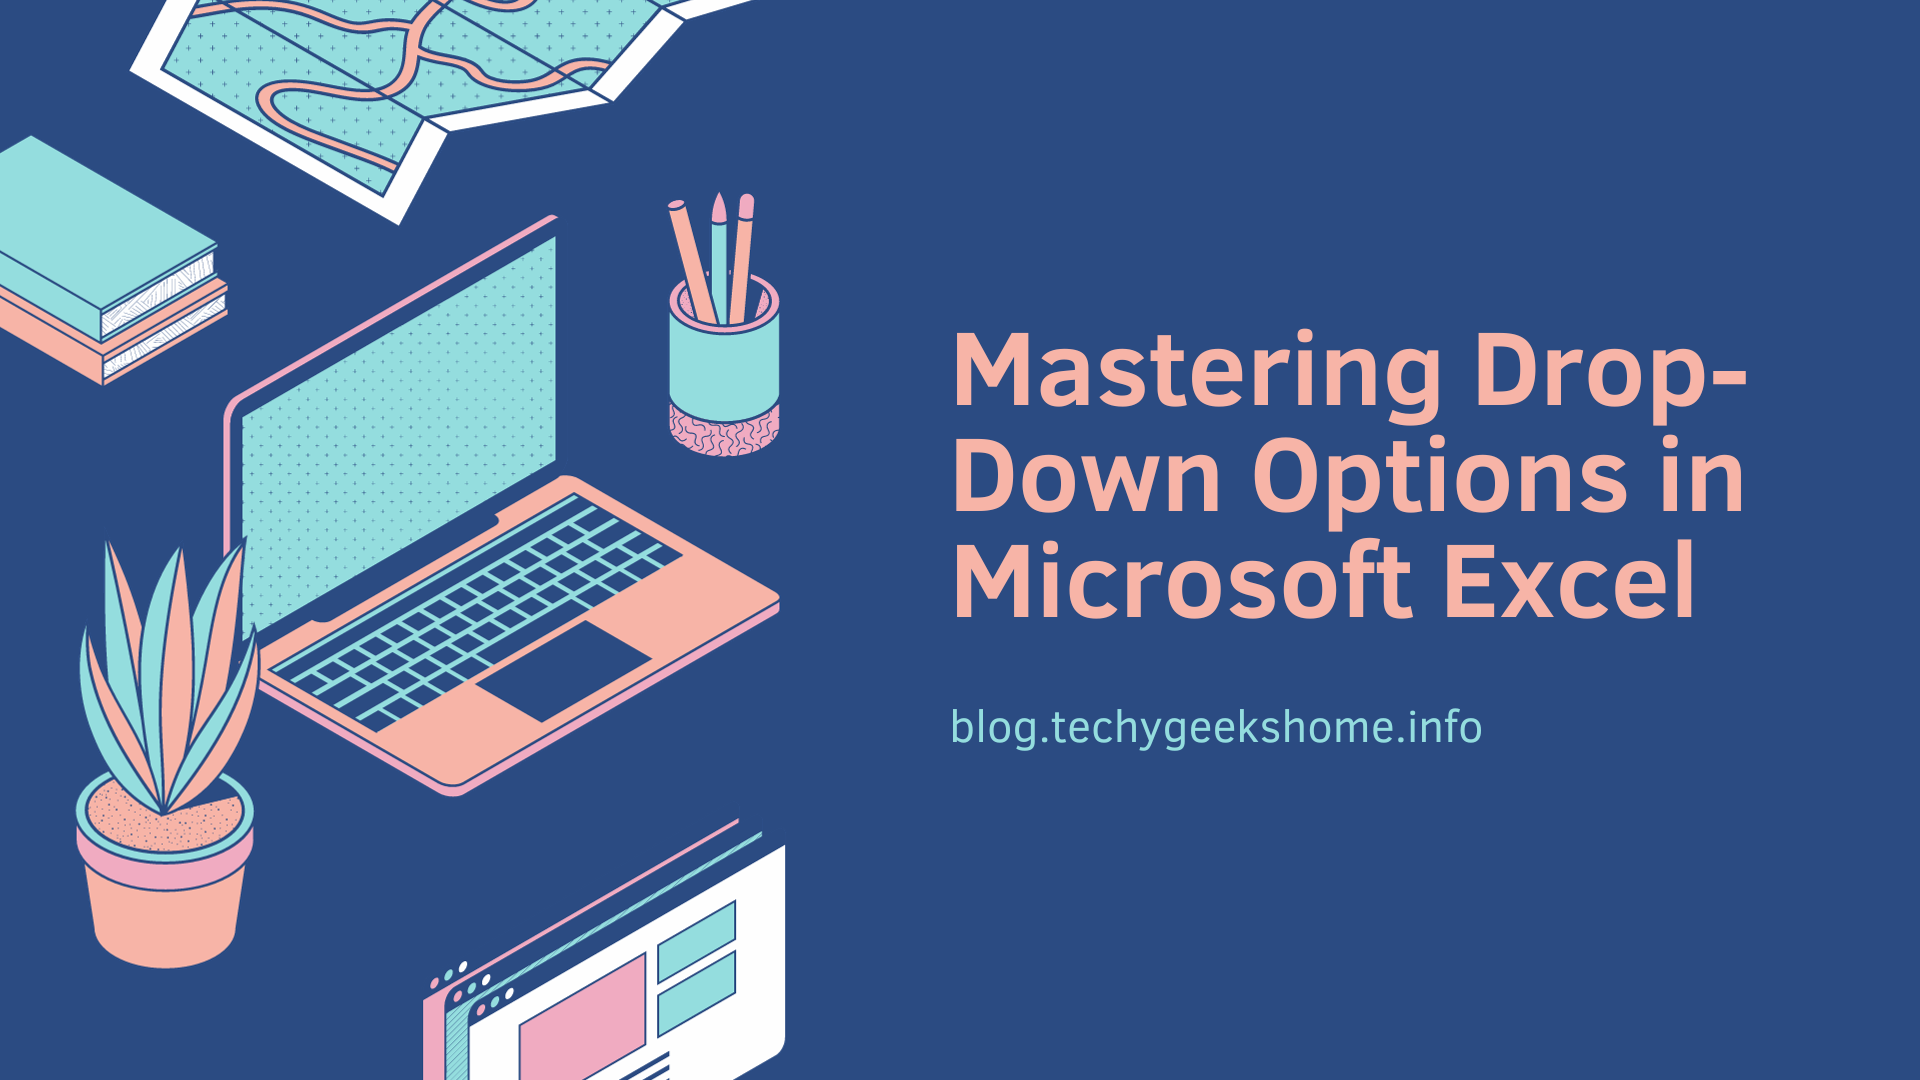 Mastering Drop-Down Options in Microsoft Excel